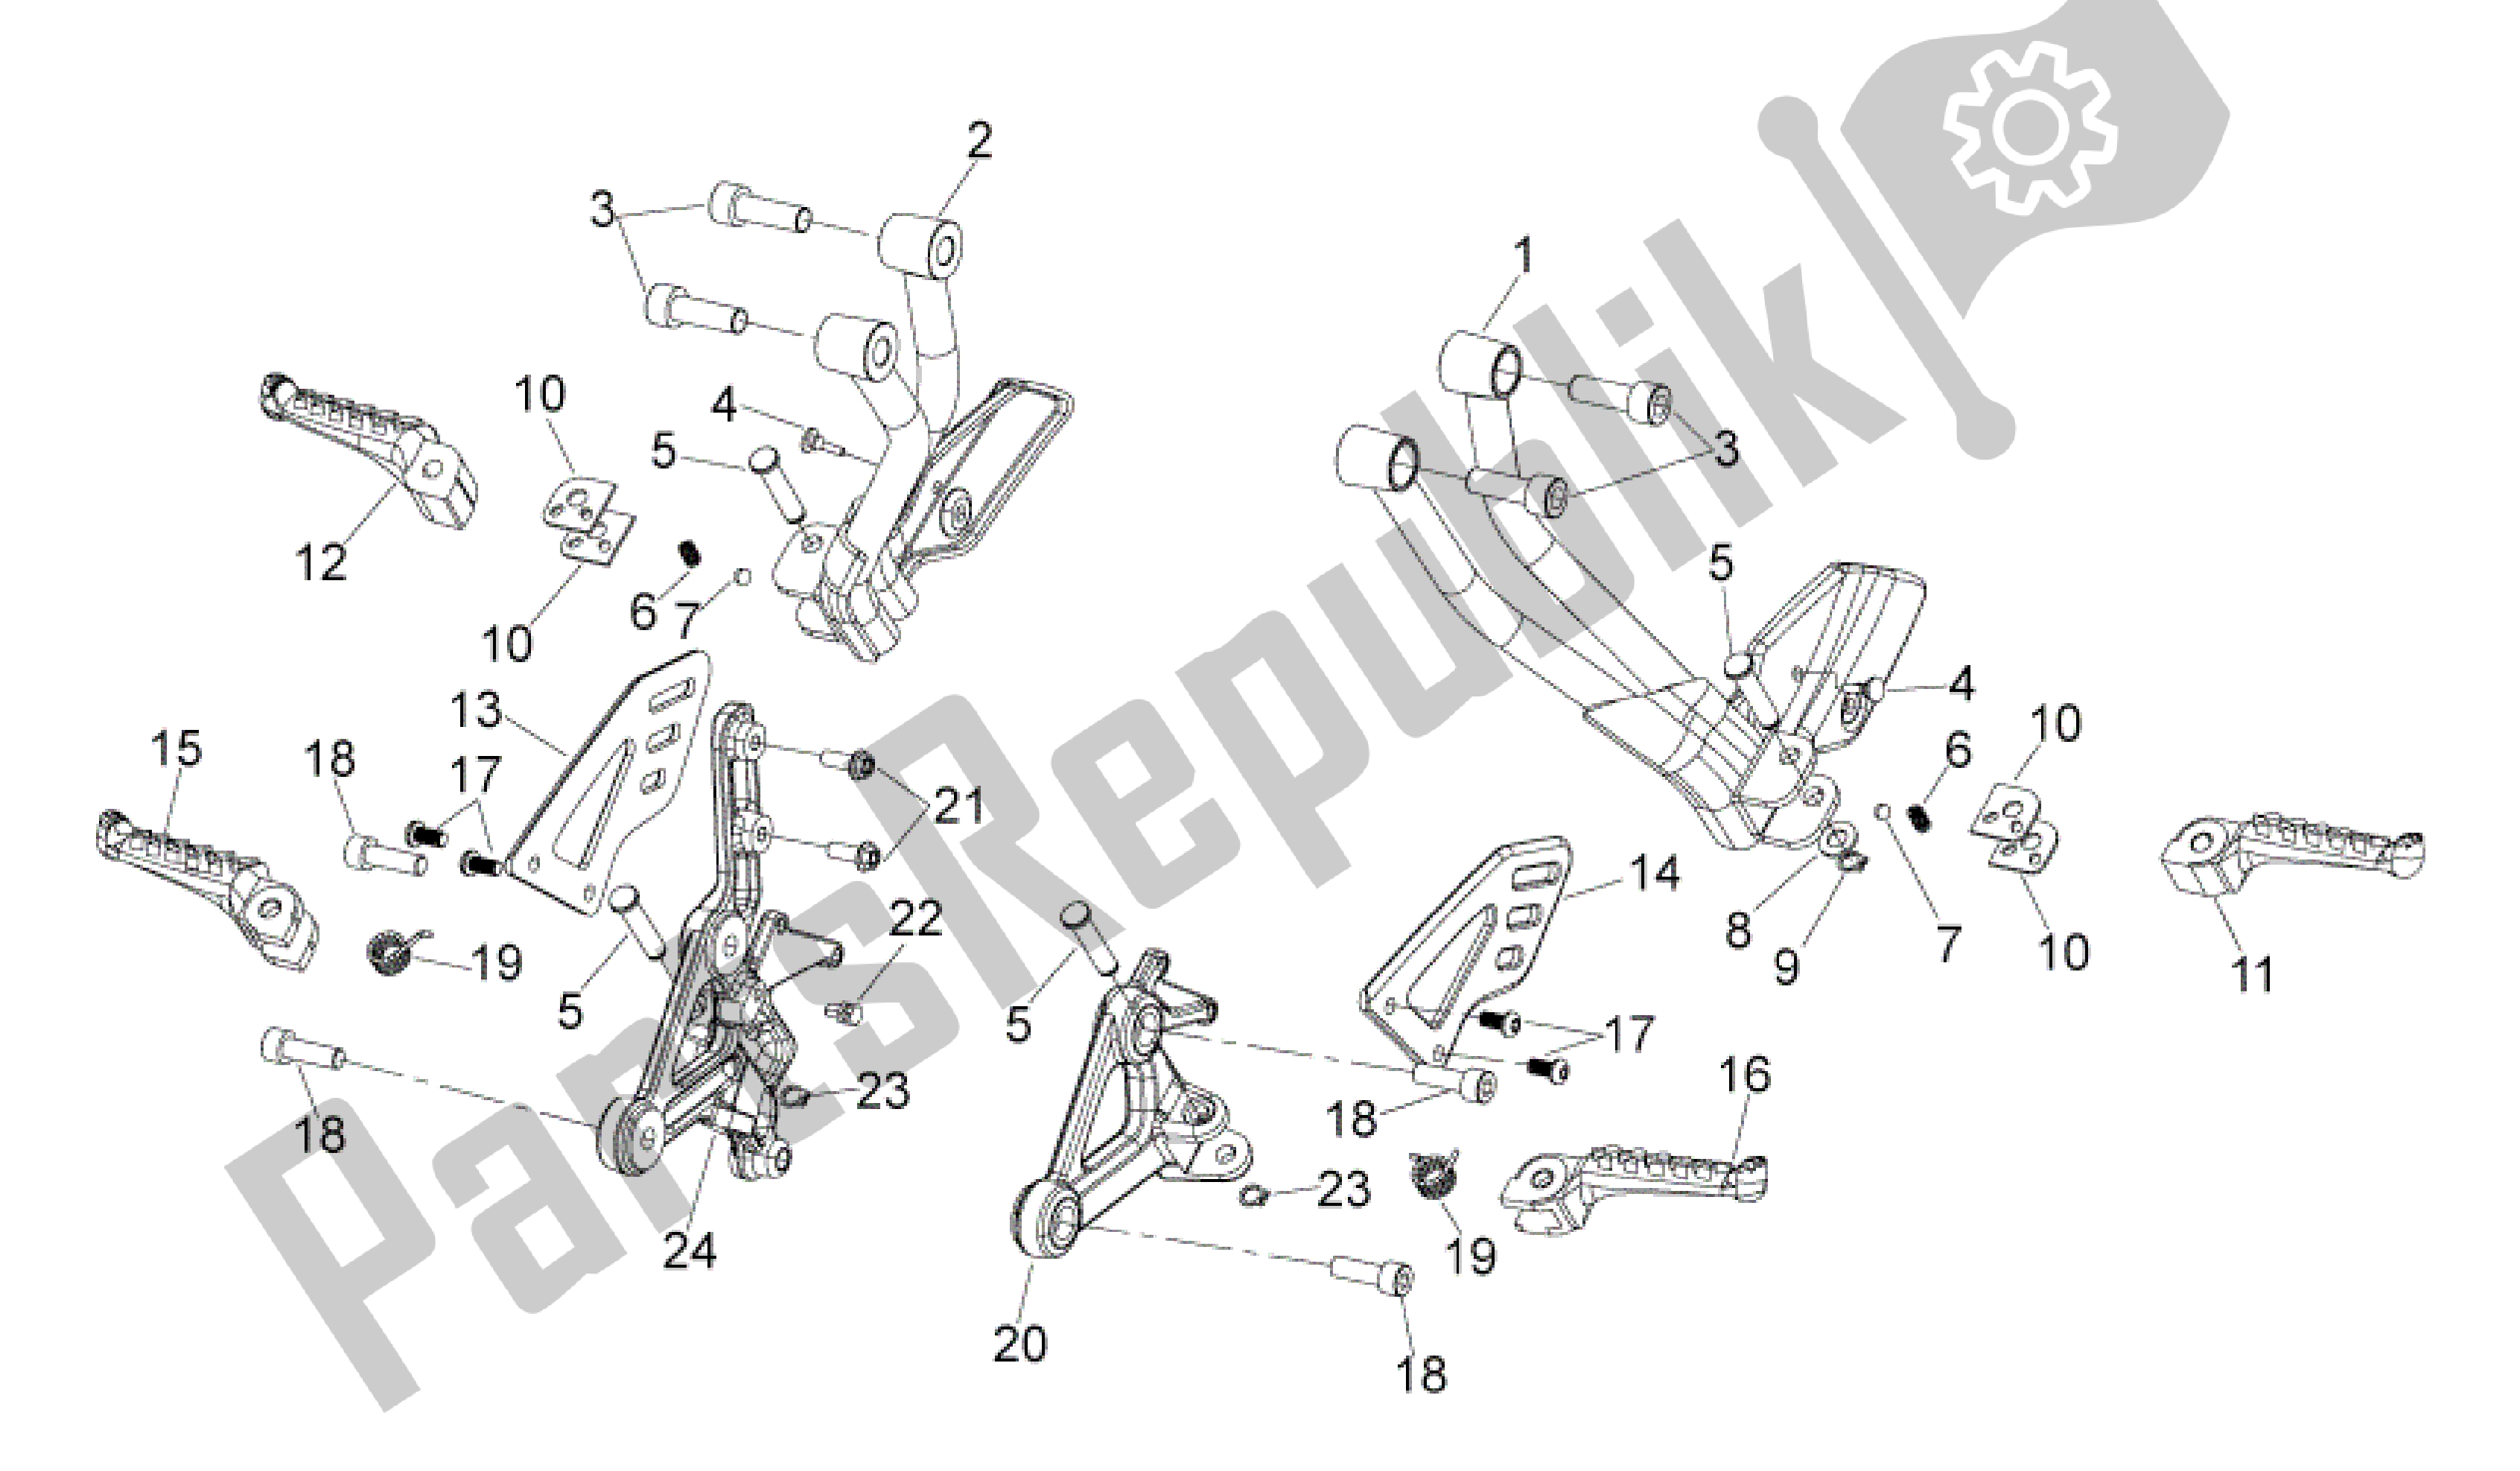 All parts for the Foot Rests of the Aprilia Shiver 750 2011 - 2013